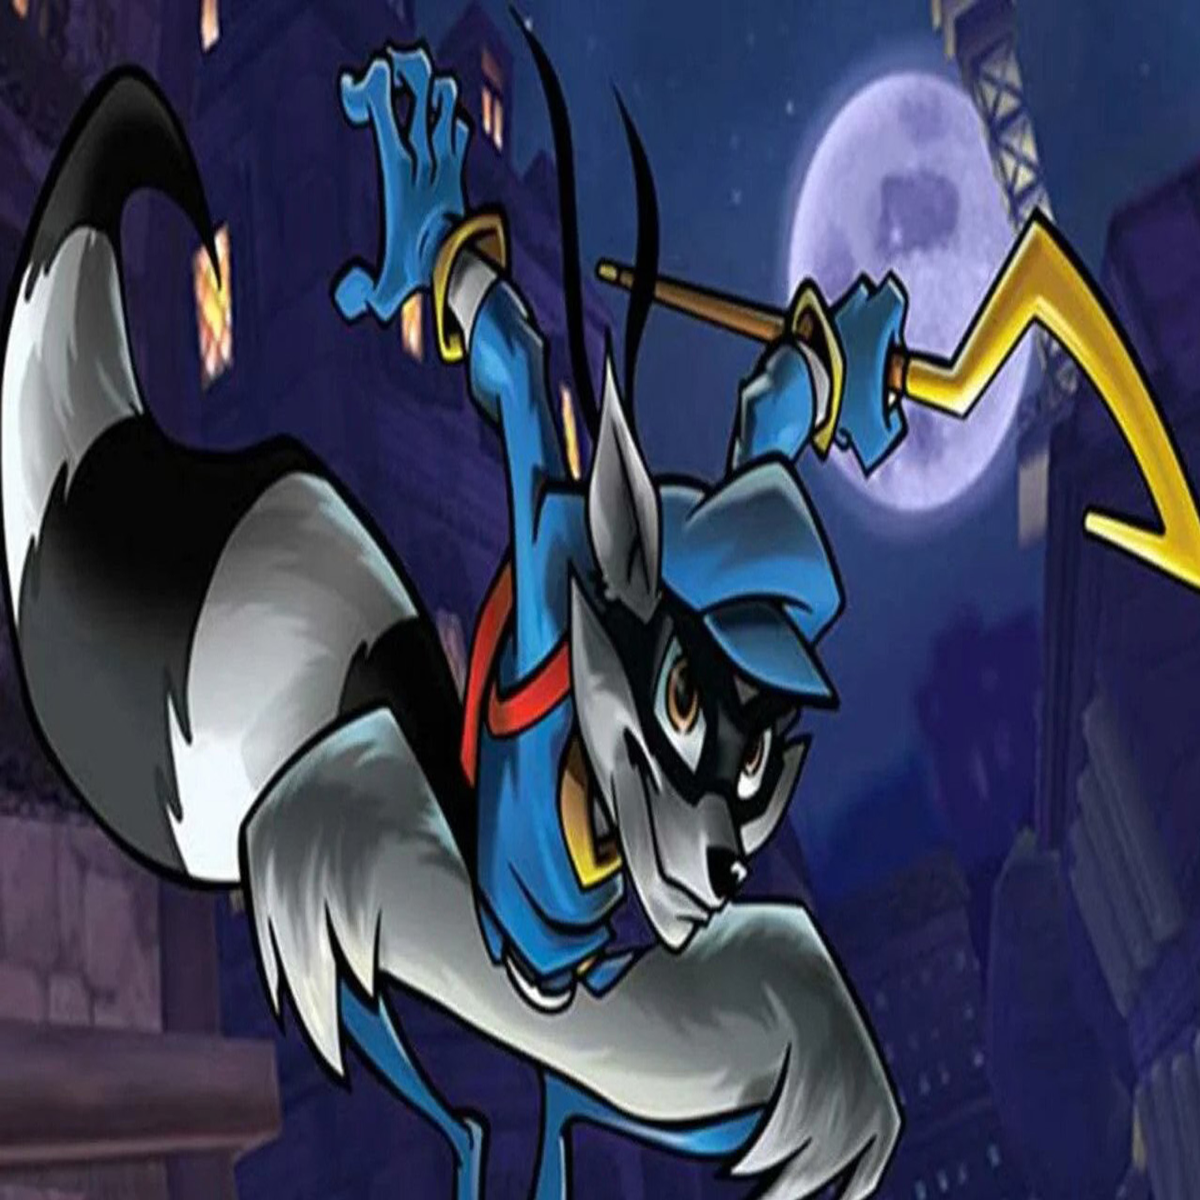 Rumor] Sly Cooper 5 in active development, to be announced later